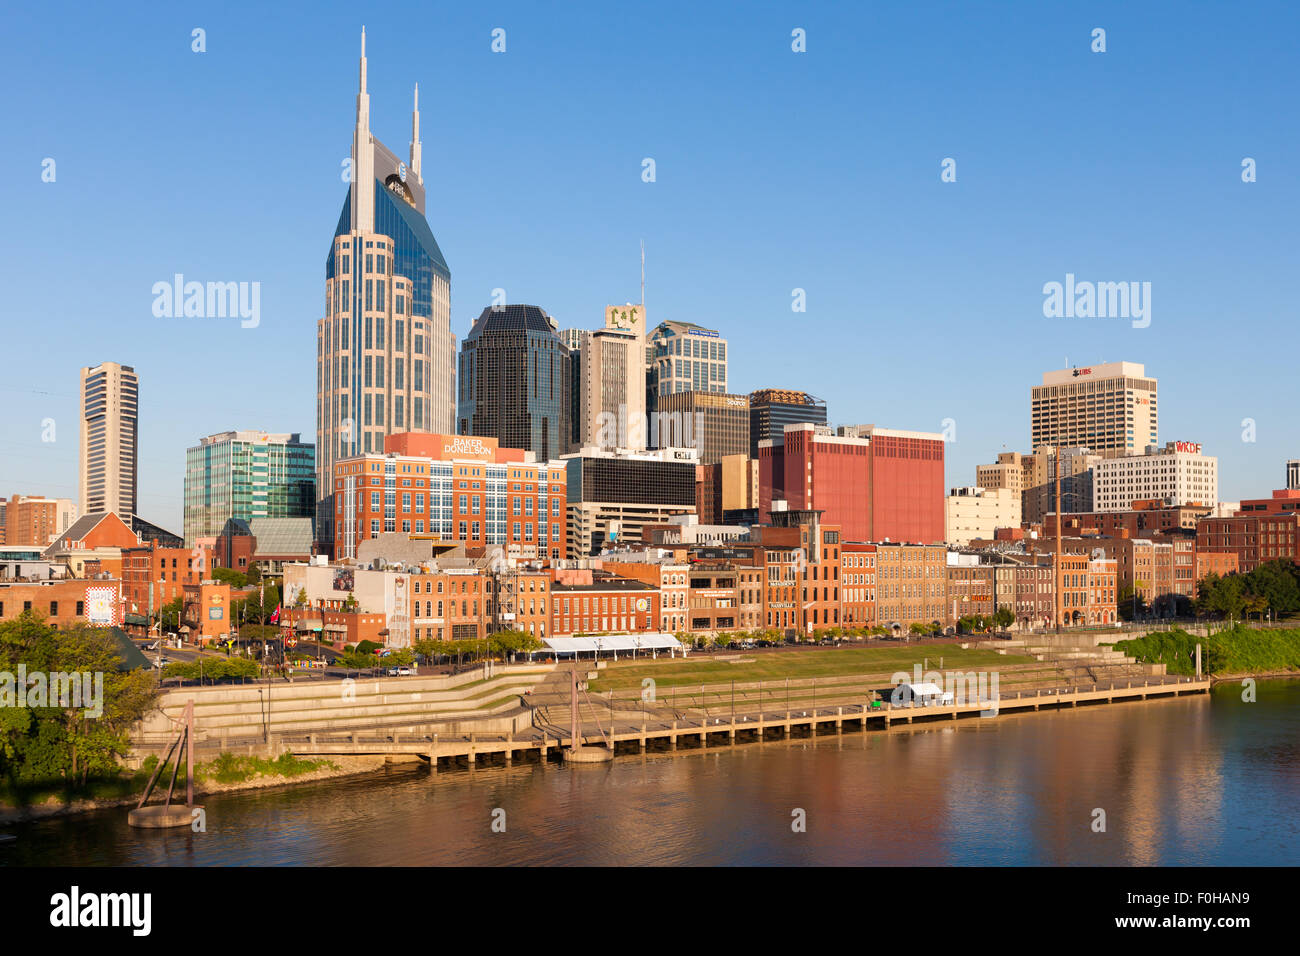 An early morning view of the skyline of Nashville, Tennessee from the East Bank of the Cumberland River. Stock Photo